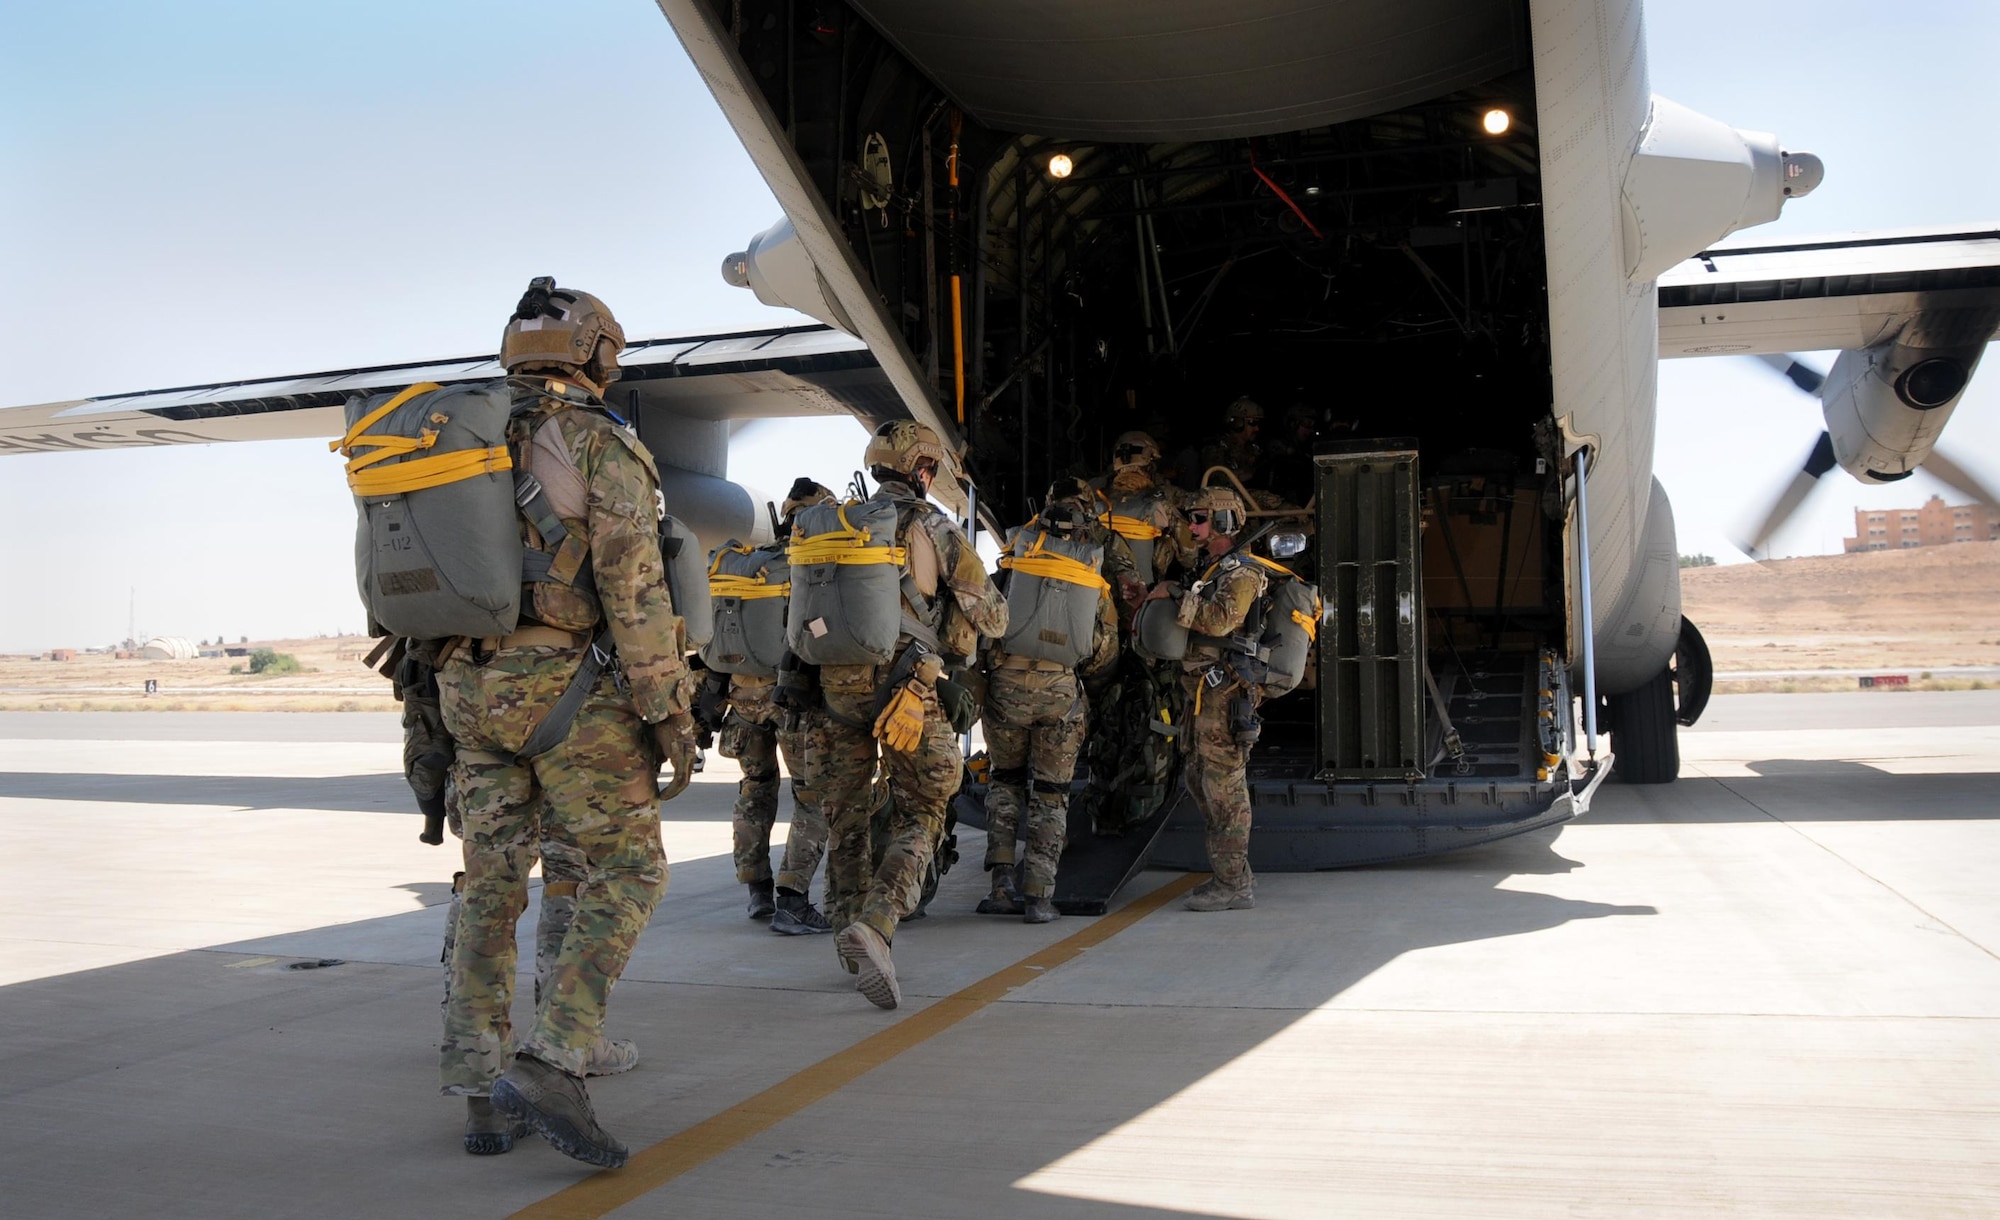 Special Tactics Airmen board a 94th Airlift Wing C-130 for an airdrop mission supporting Exercise Eager Lion in Jordan, May 19, 2016. Special Tactics Airmen jump low-level static line jumps to infiltrate into hostile or austere territory where aircraft cannot land. (U.S. Air Force photo/Staff Sgt. Alan Abernethy)
